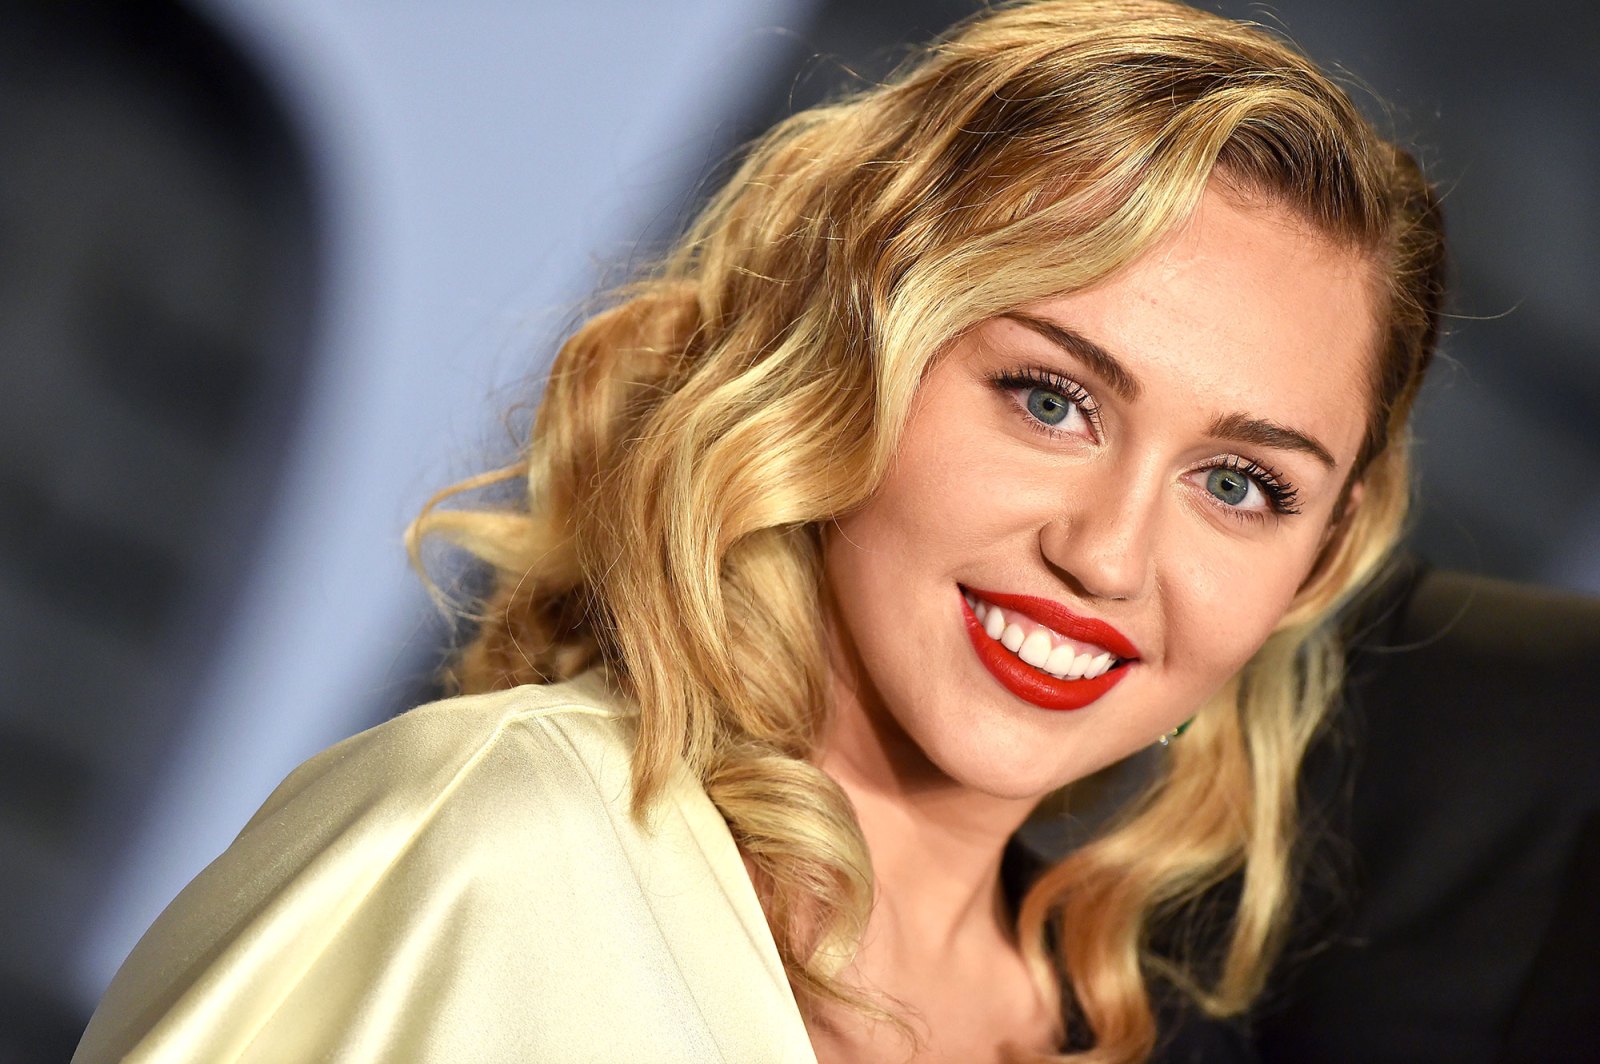 Miley Cyrus’ Dating History: A Timeline of Her Famous Exes and Flings